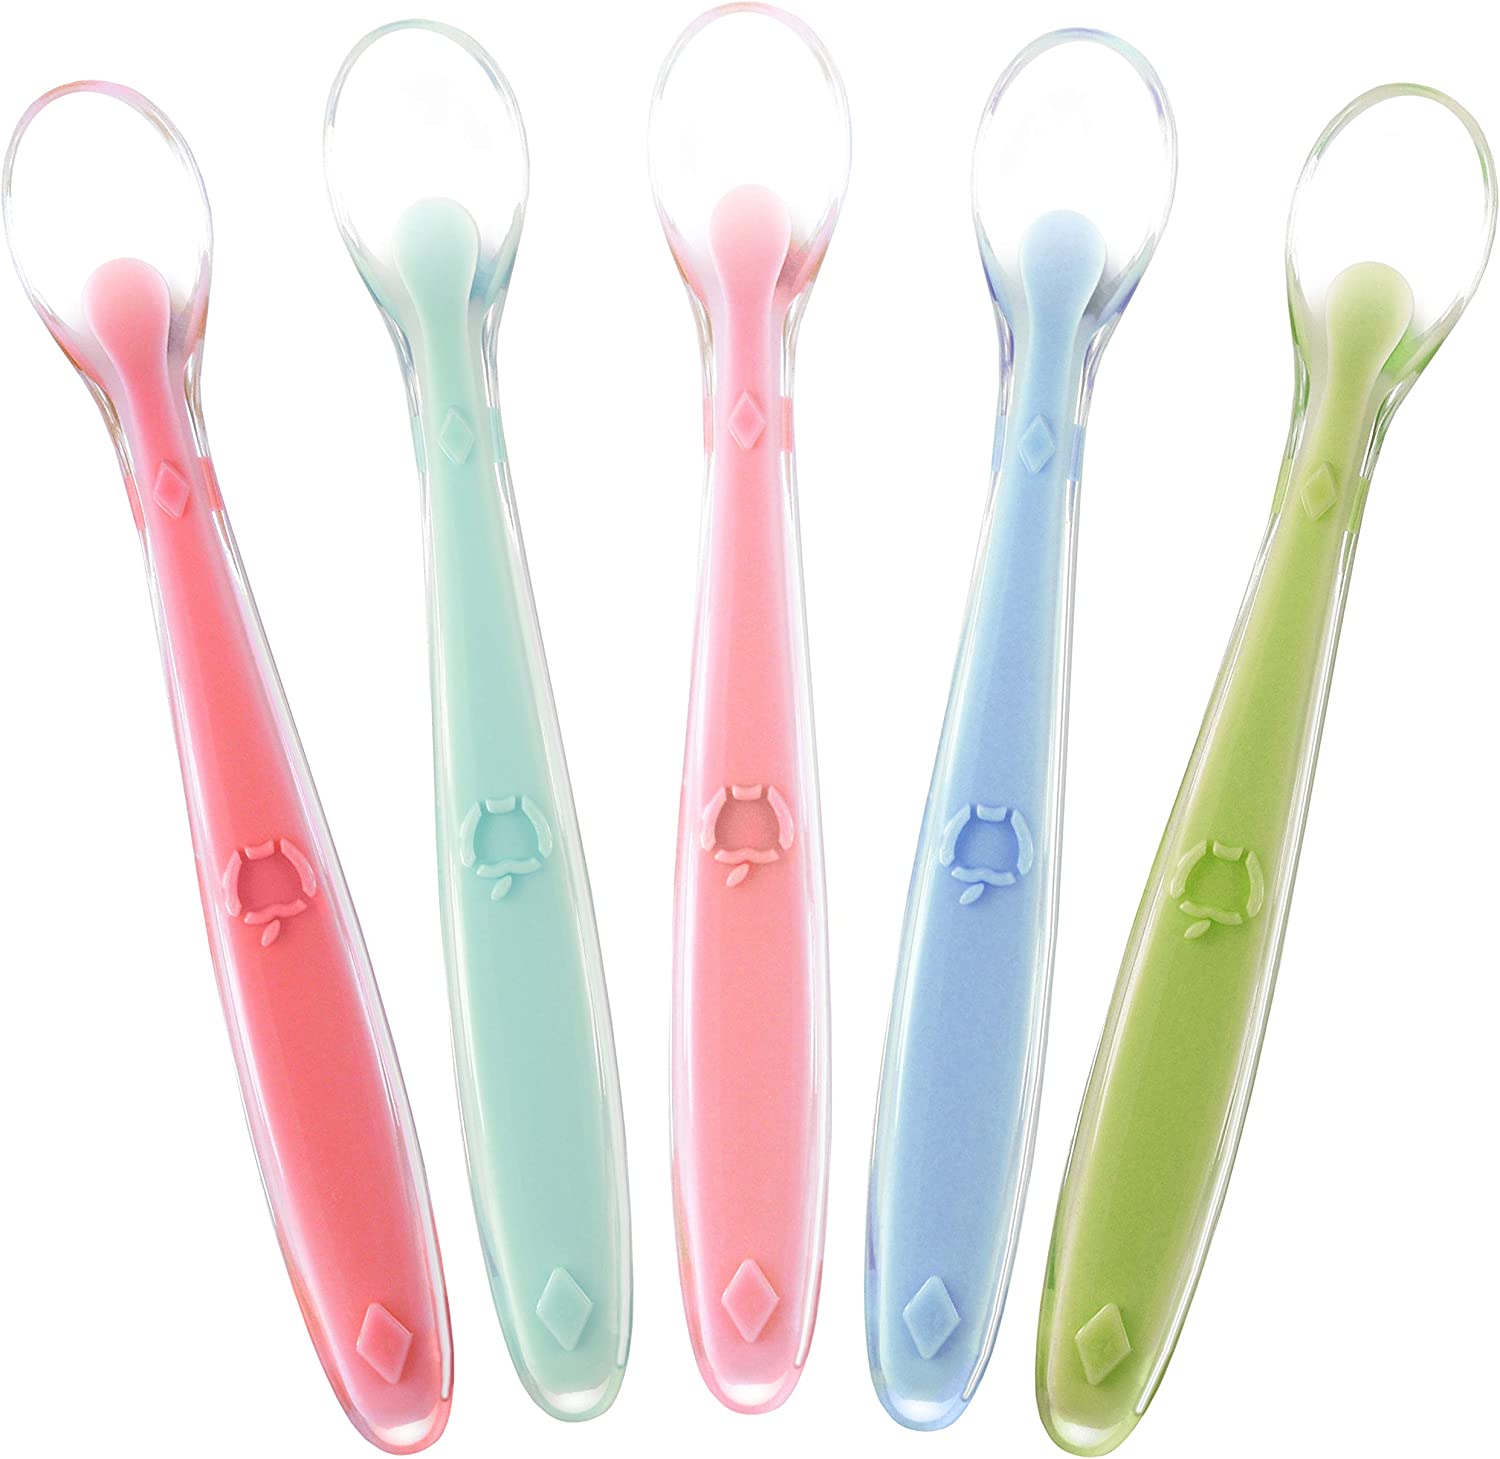 Best First Stage Baby Infant Spoons, 5-Pack, Soft Silicone Baby Spoons Training Spoon Gift Set For Infant